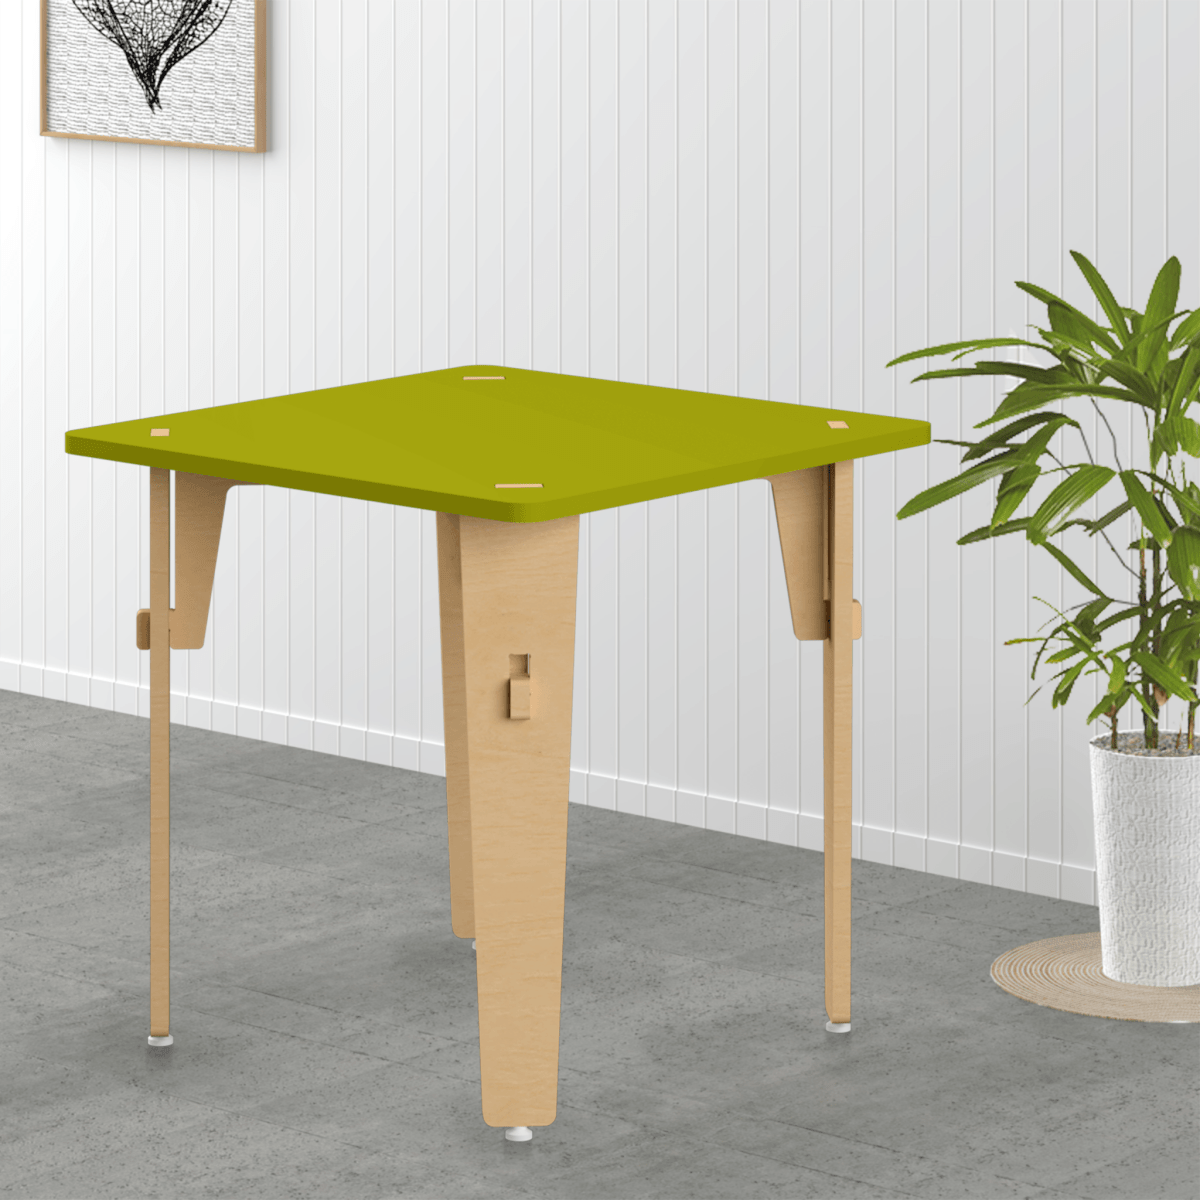 X&Y Lime Fig Table - Green - FG130918G